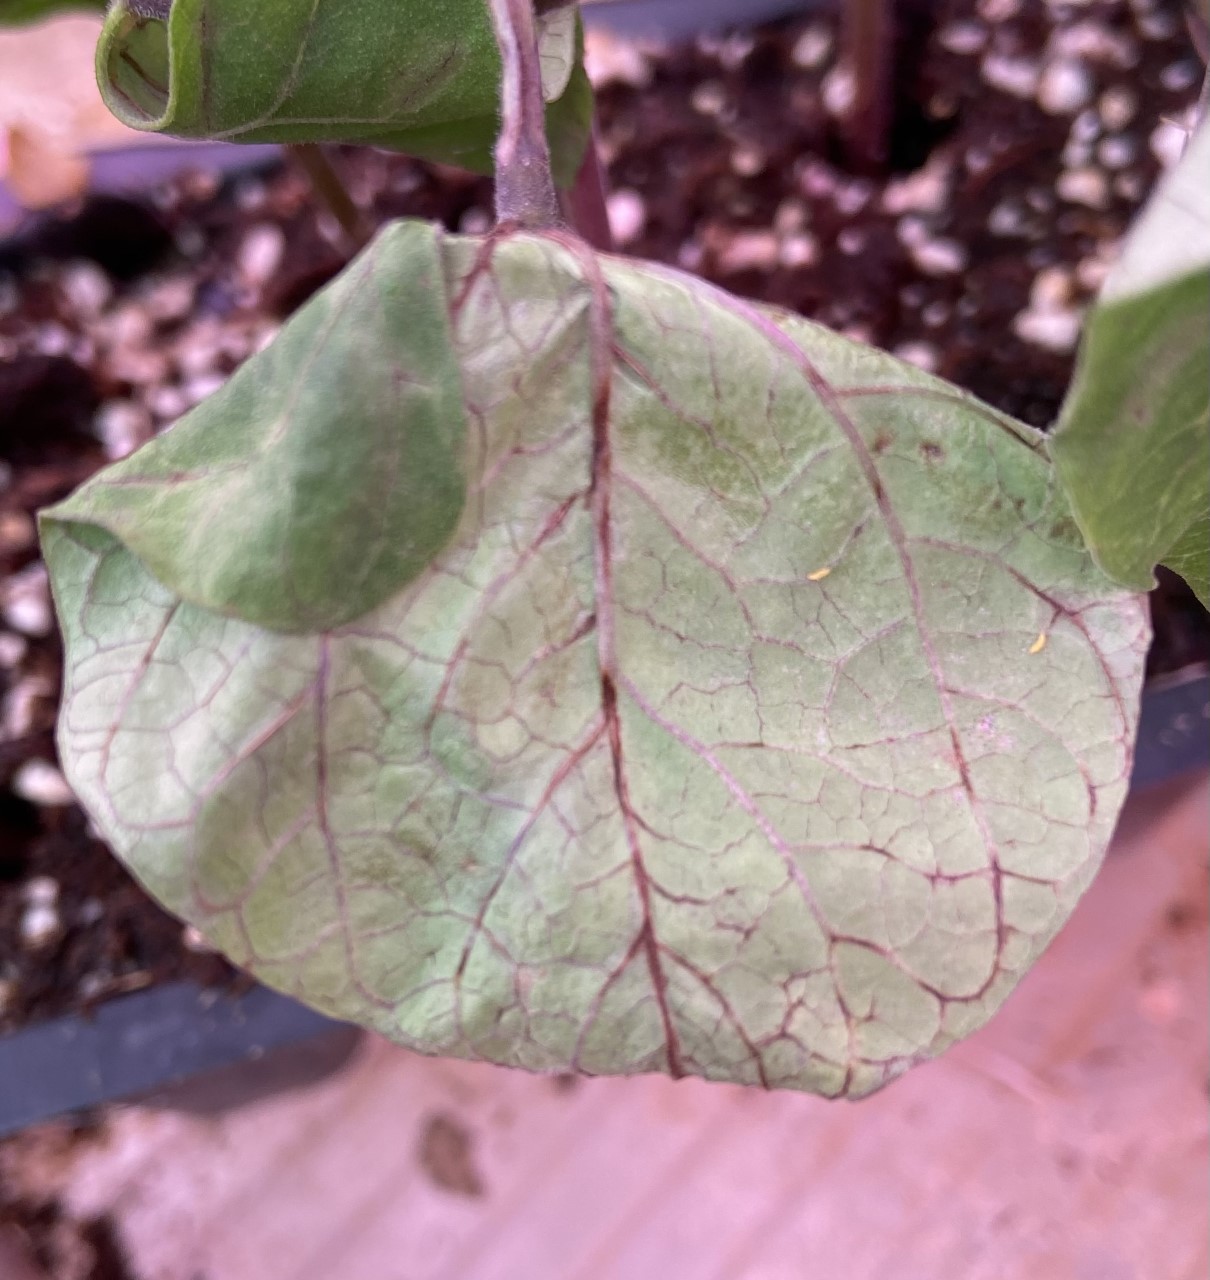 Red-brown lesion on dry bean leaf.